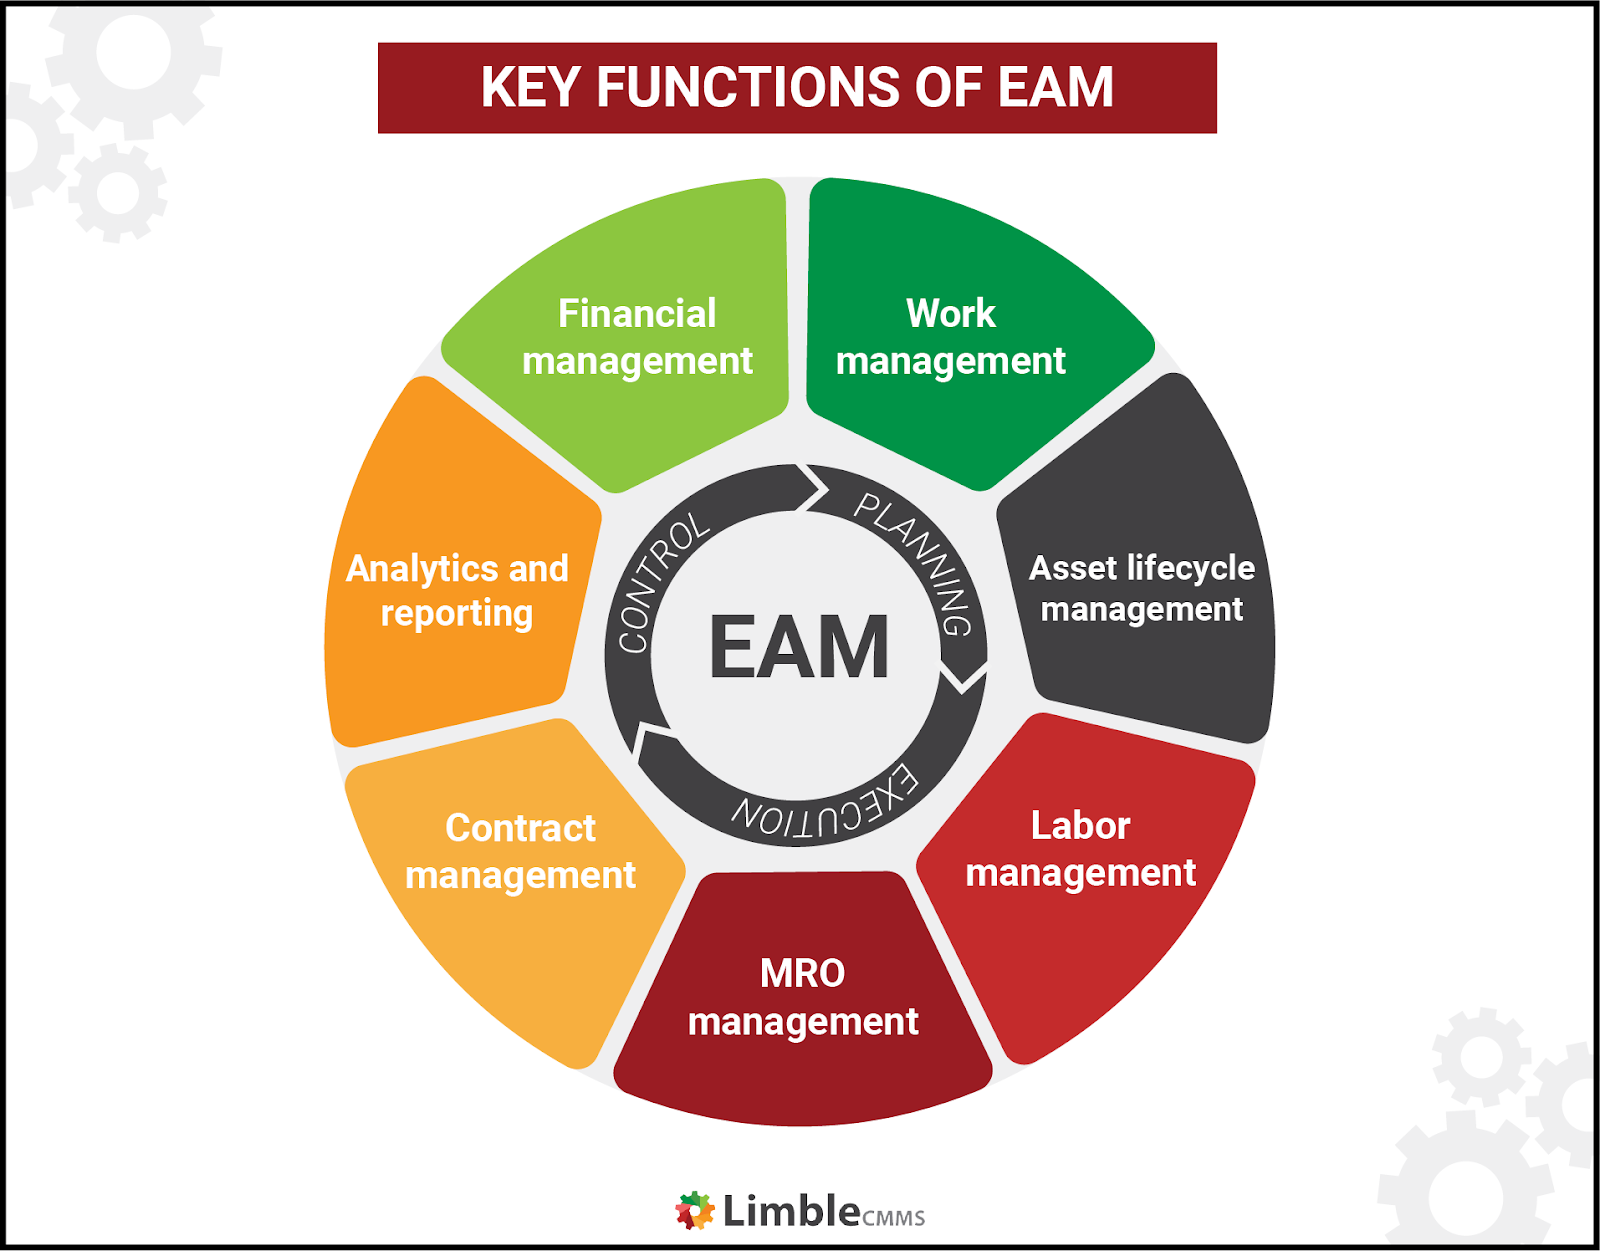 Key functions of EAM